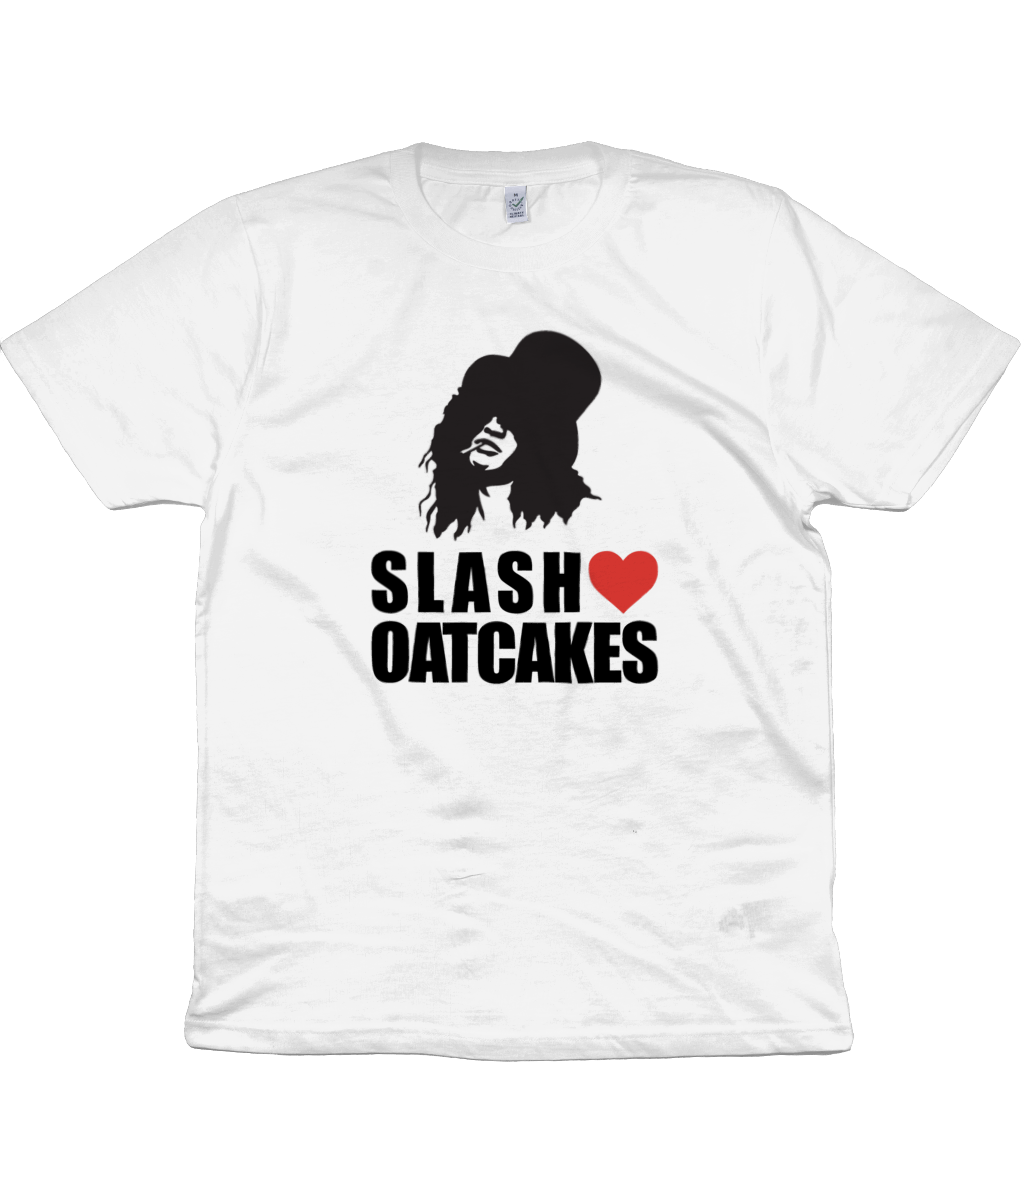 Introducing the Slash Loves Oatcakes Tshirt: A Tribute to the Legendary Guitarist and Stoke-on-Trent's Delightful Delicacy!